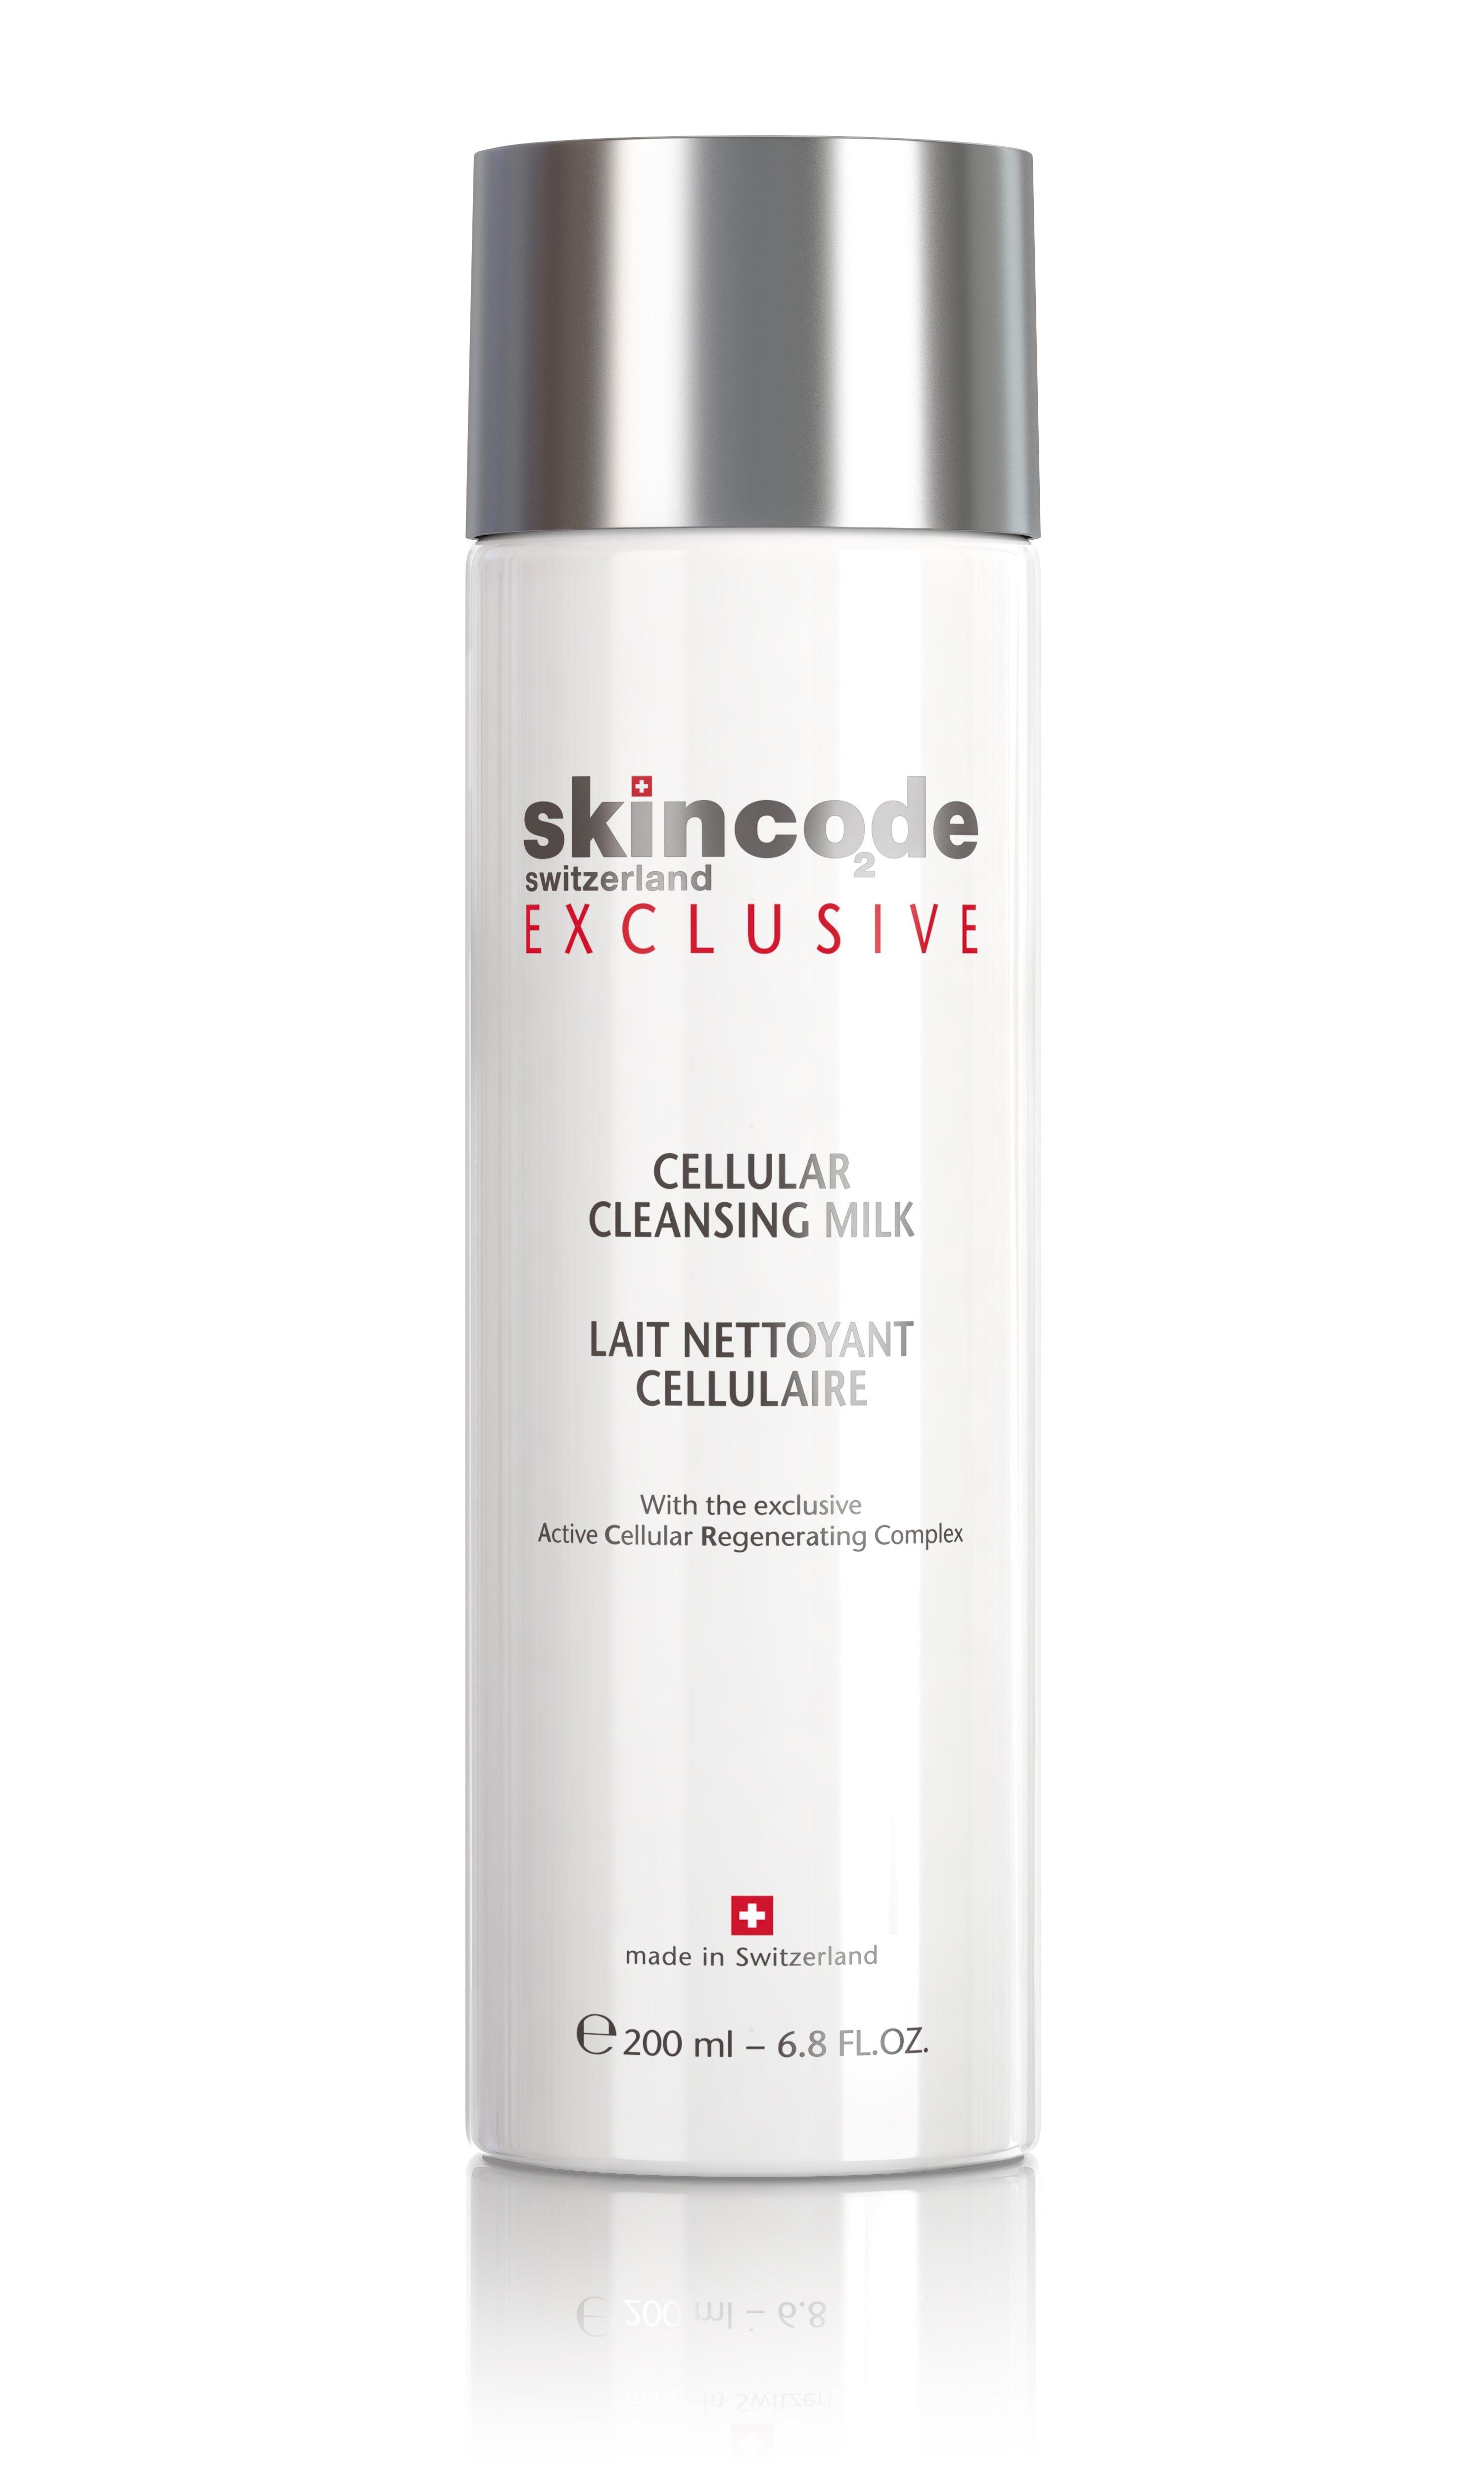 Image of skincode Cellular Cleansing Milk - 200ml